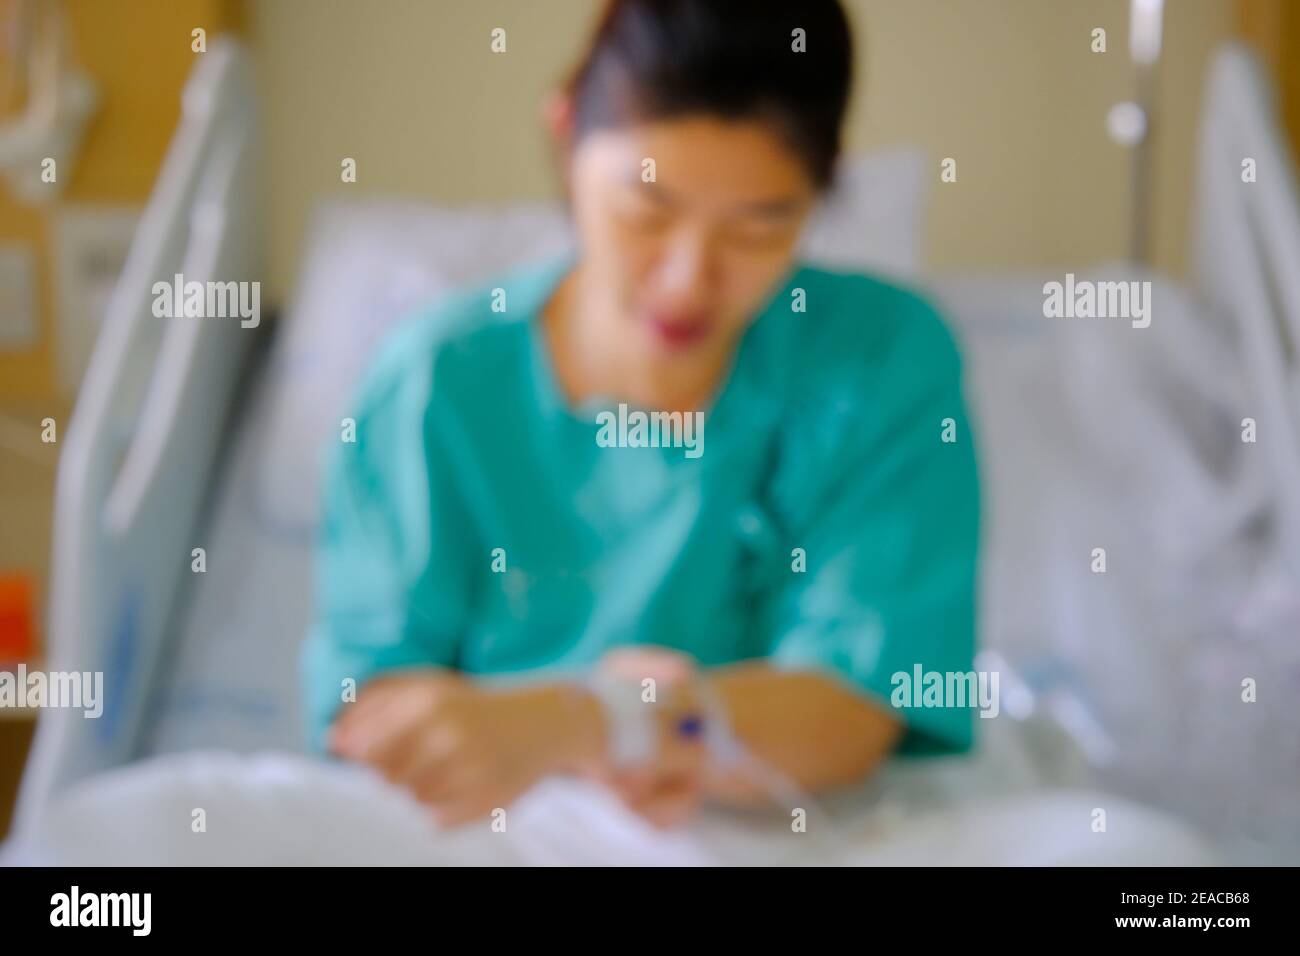 An out of focus picture of an Asian woman being treated for her illness in a hospital room, sitting on a bed with a green uniform and saline solution Stock Photo